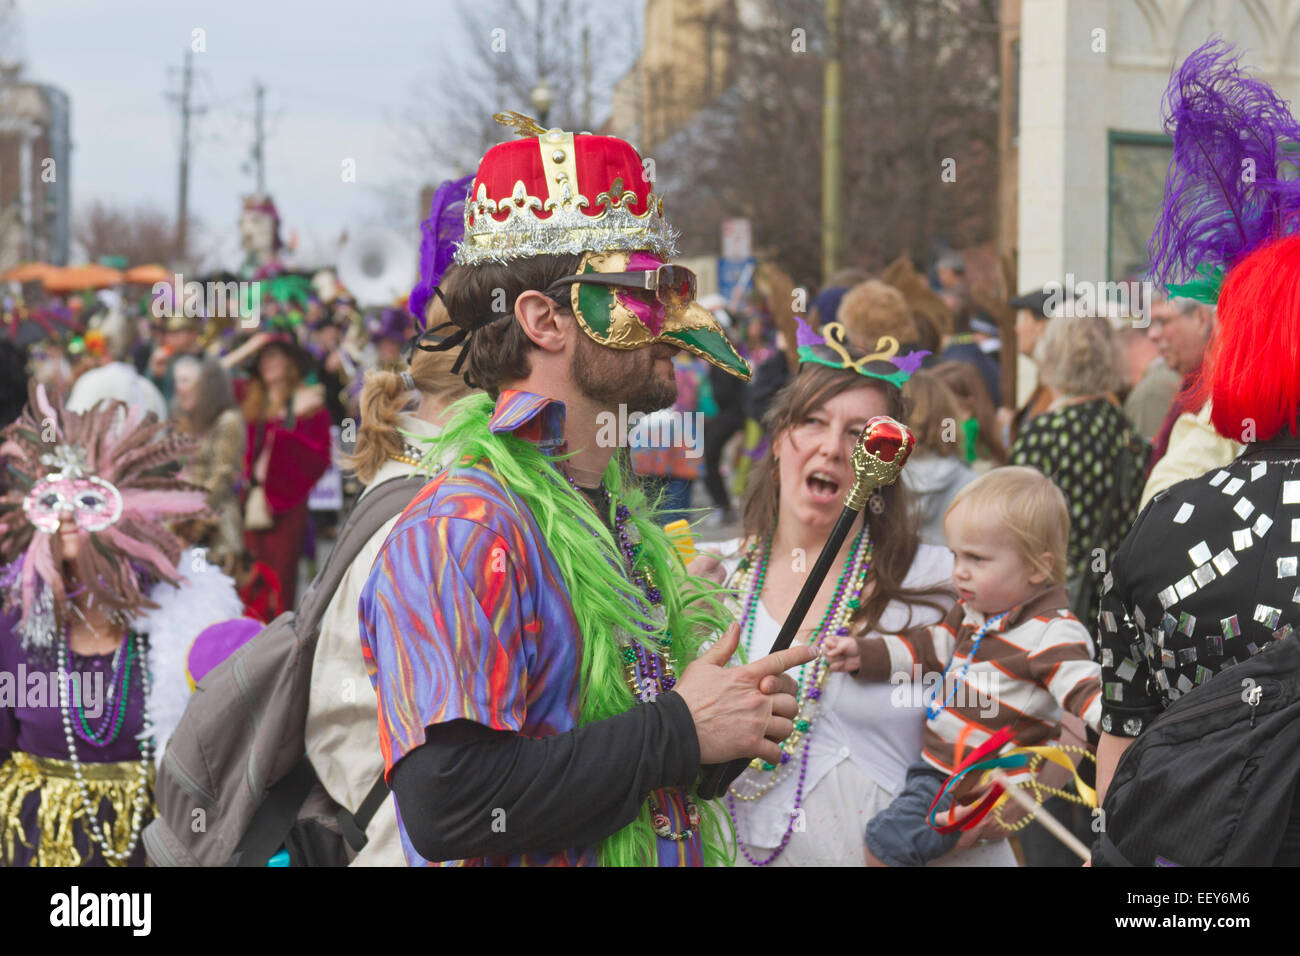 People wear costumes and colorful masks in the annual Mardi Gras parade